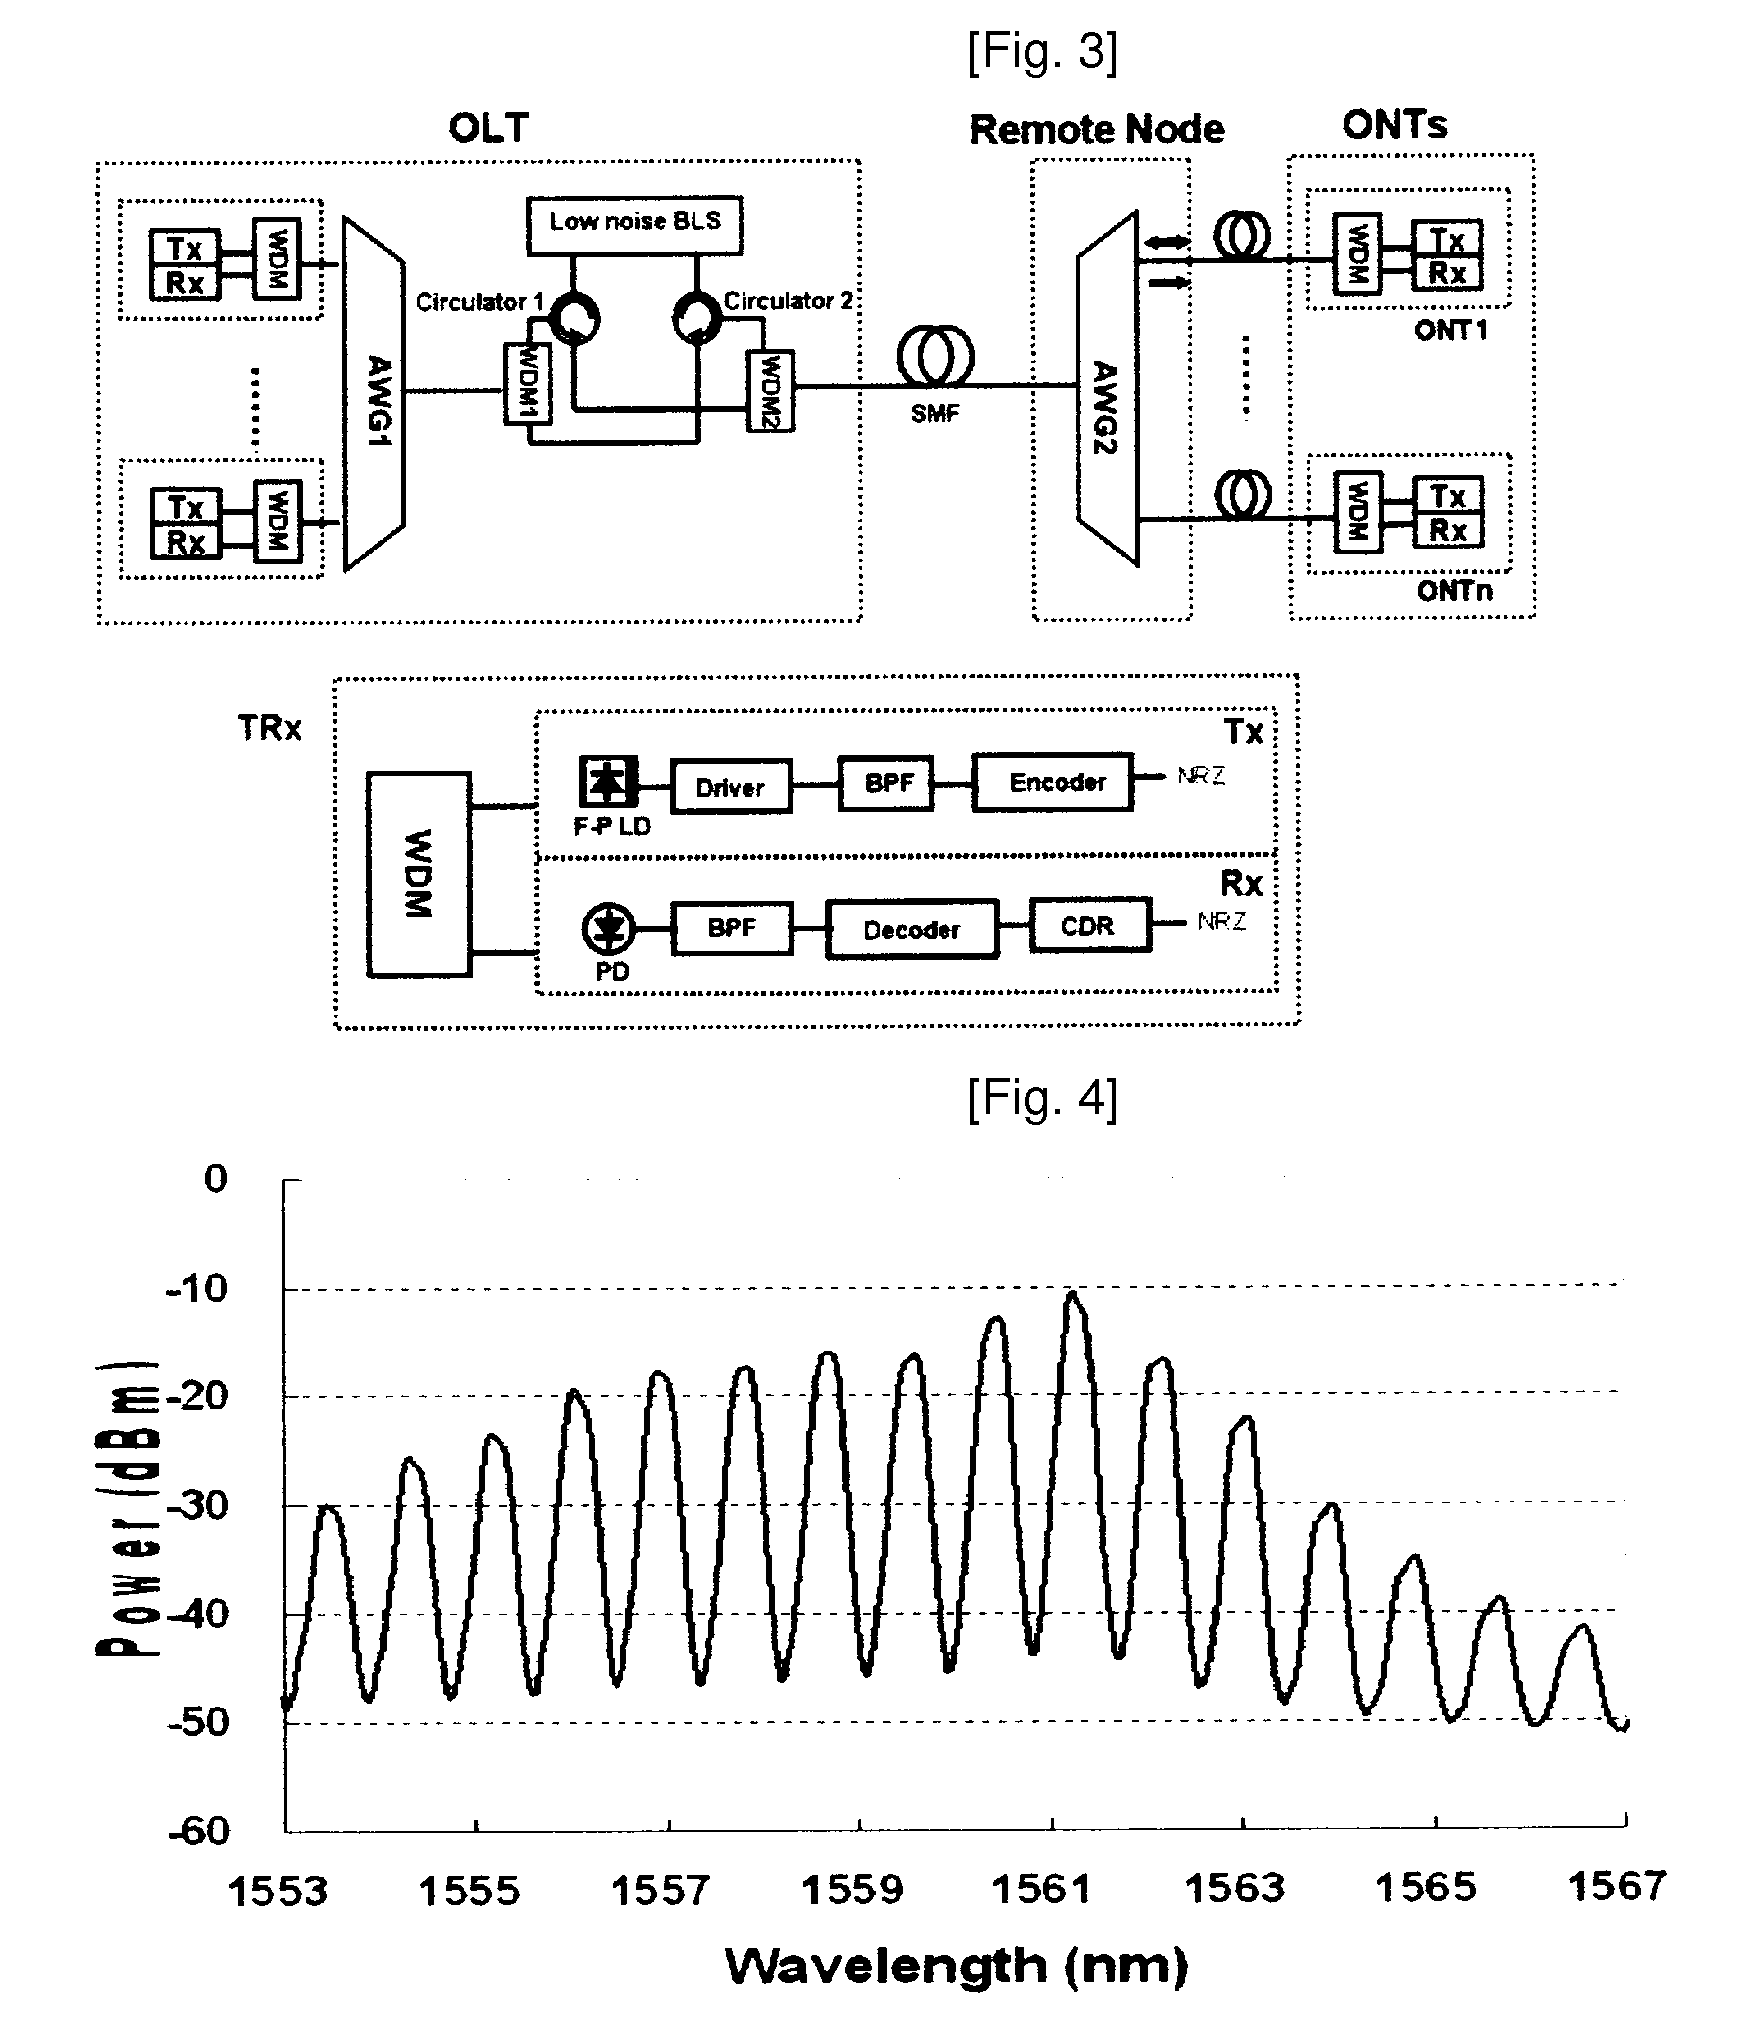 Wavelength Division Multiplexed-Passive Optical Network Capable of High-Speed Transmission of an Optical Signal By Using Modulation Format Having High Spectral Efficiency